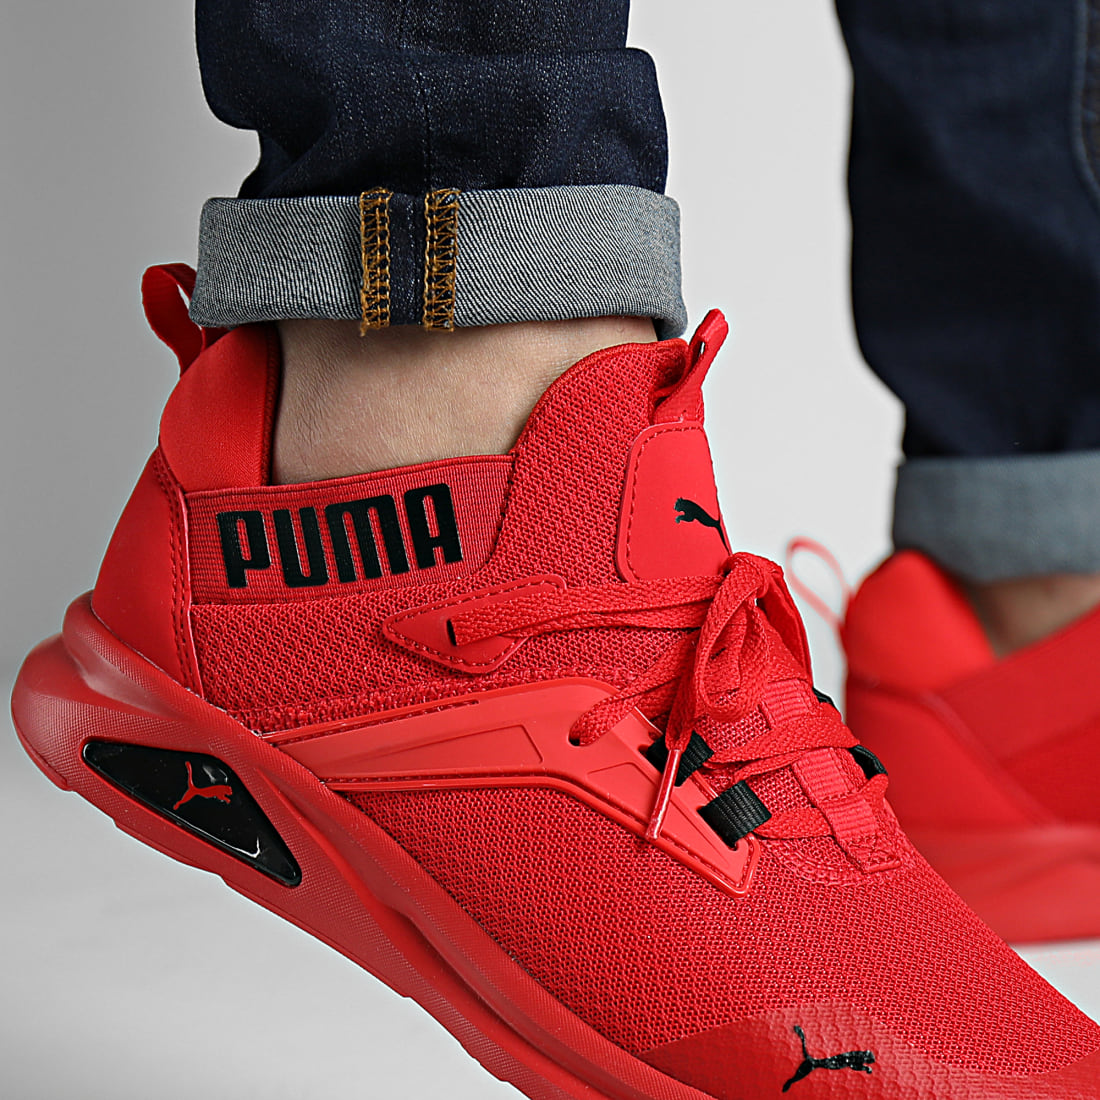 Achat chaussures Puma Homme Chaussure de Sport, vente Puma ENZO 2 Refresh  red 376687 Red - Basket Homme rouge